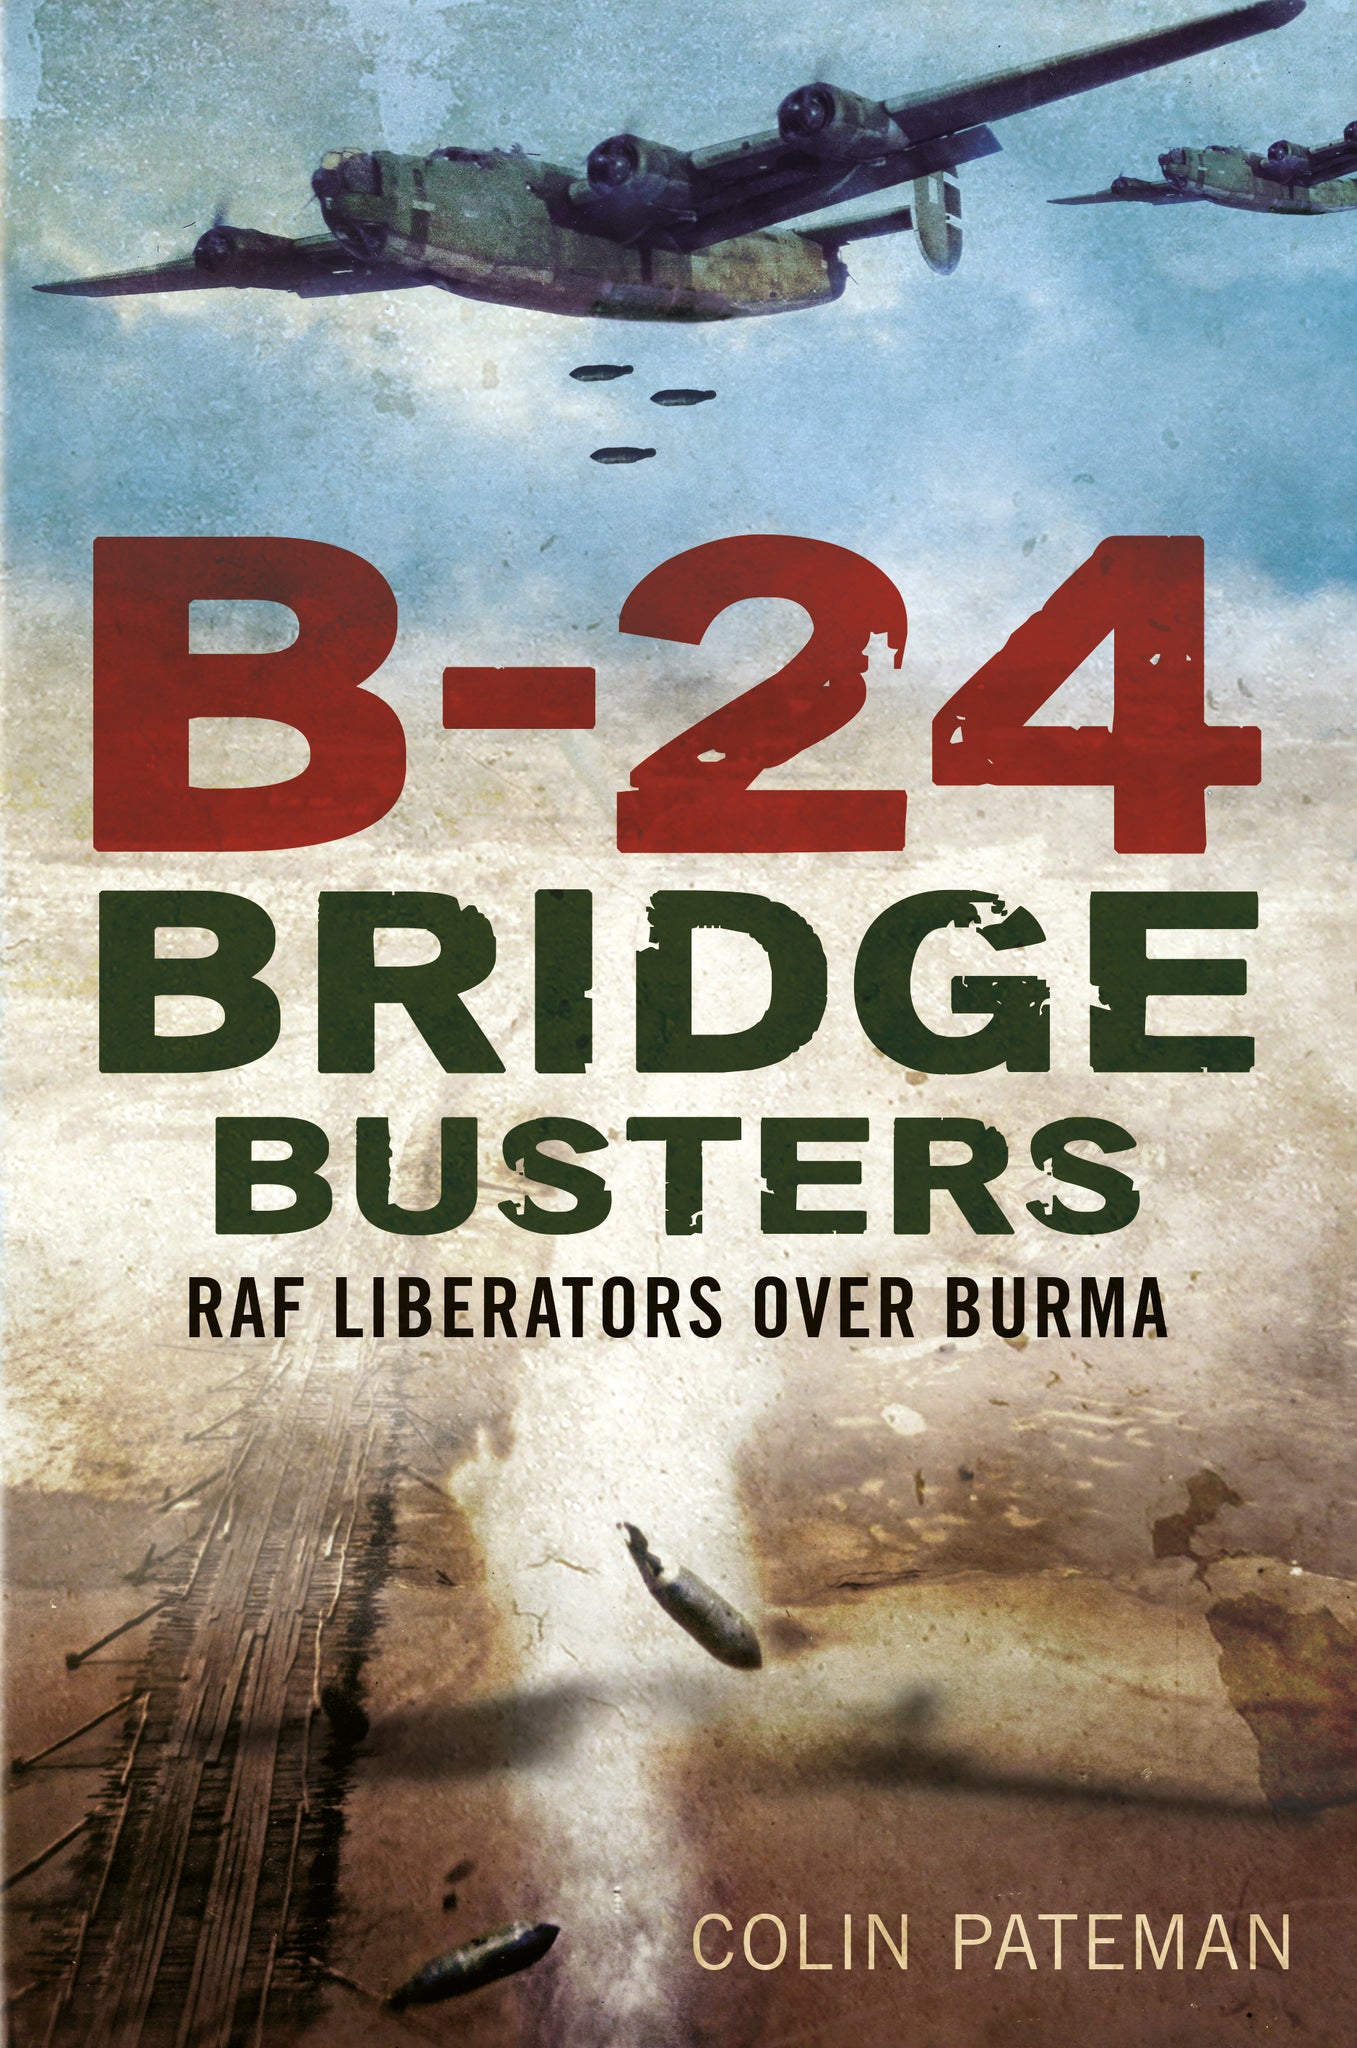 B-24 Bridge Busters: RAF Liberators over Burma - available now from Fonthill Media